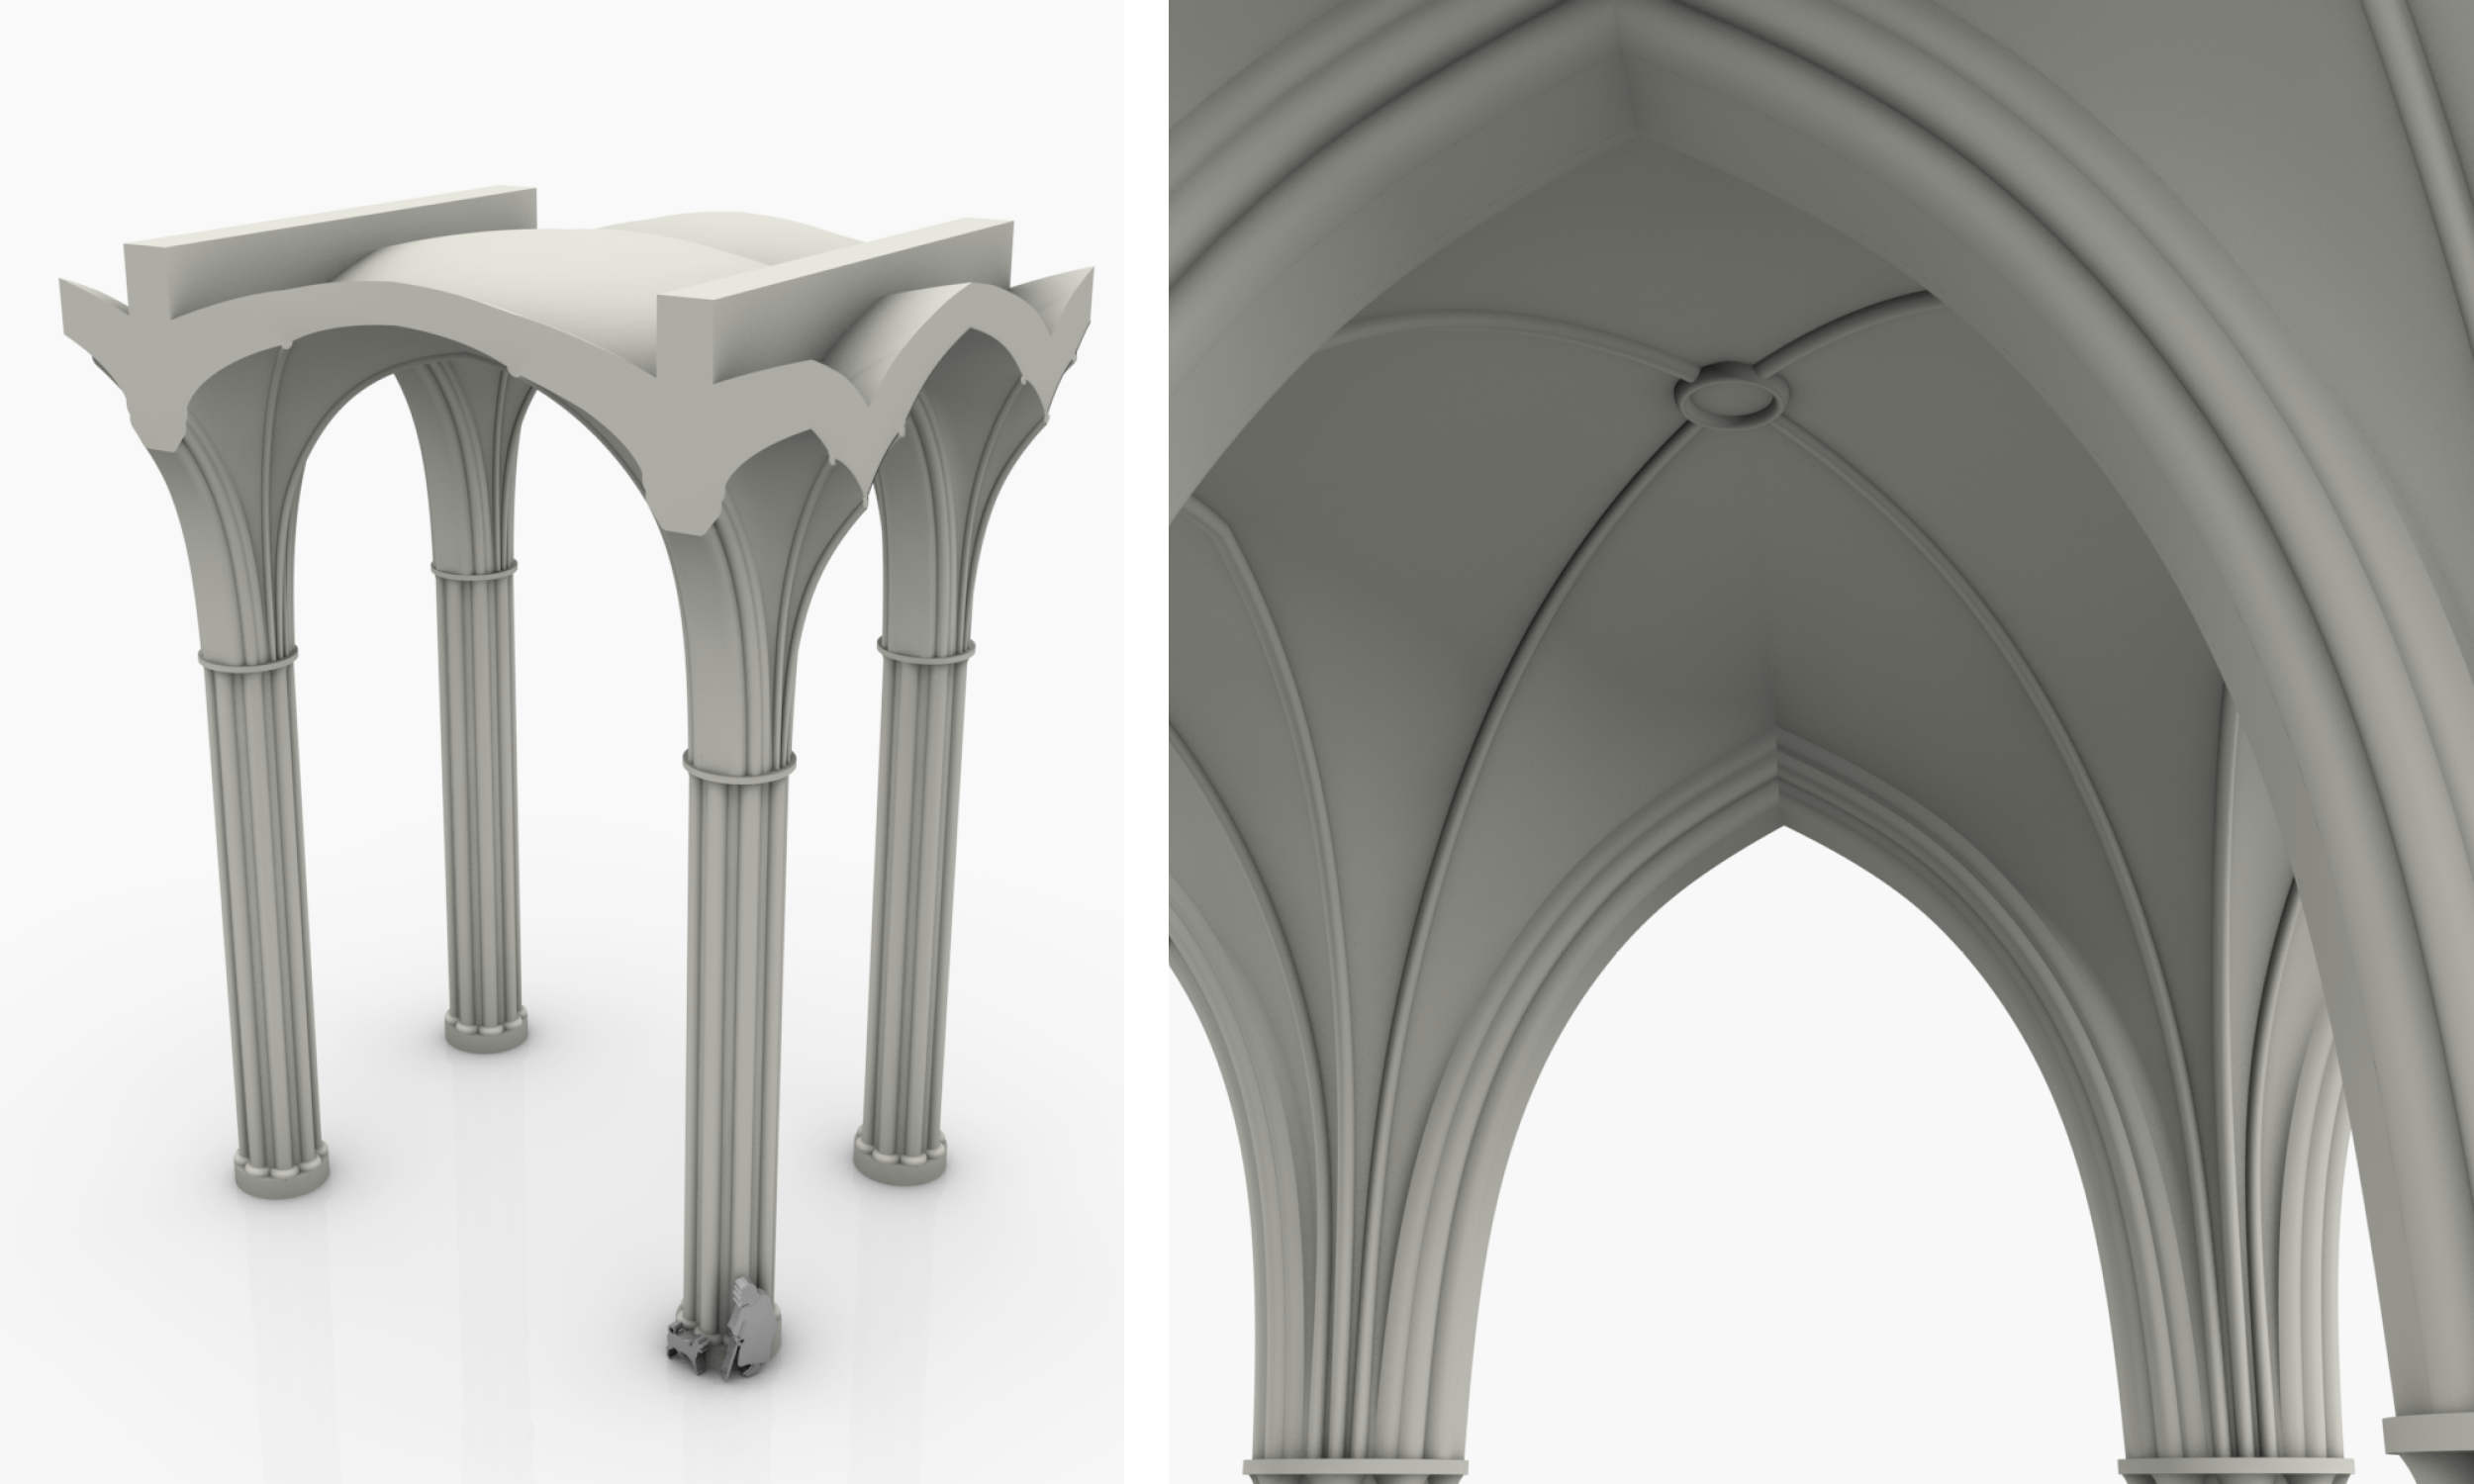 Left: This graphic shows the vault model of the Nikolaikirche. Right: This graphic shows the vault model of the Nikolaikirche from below.